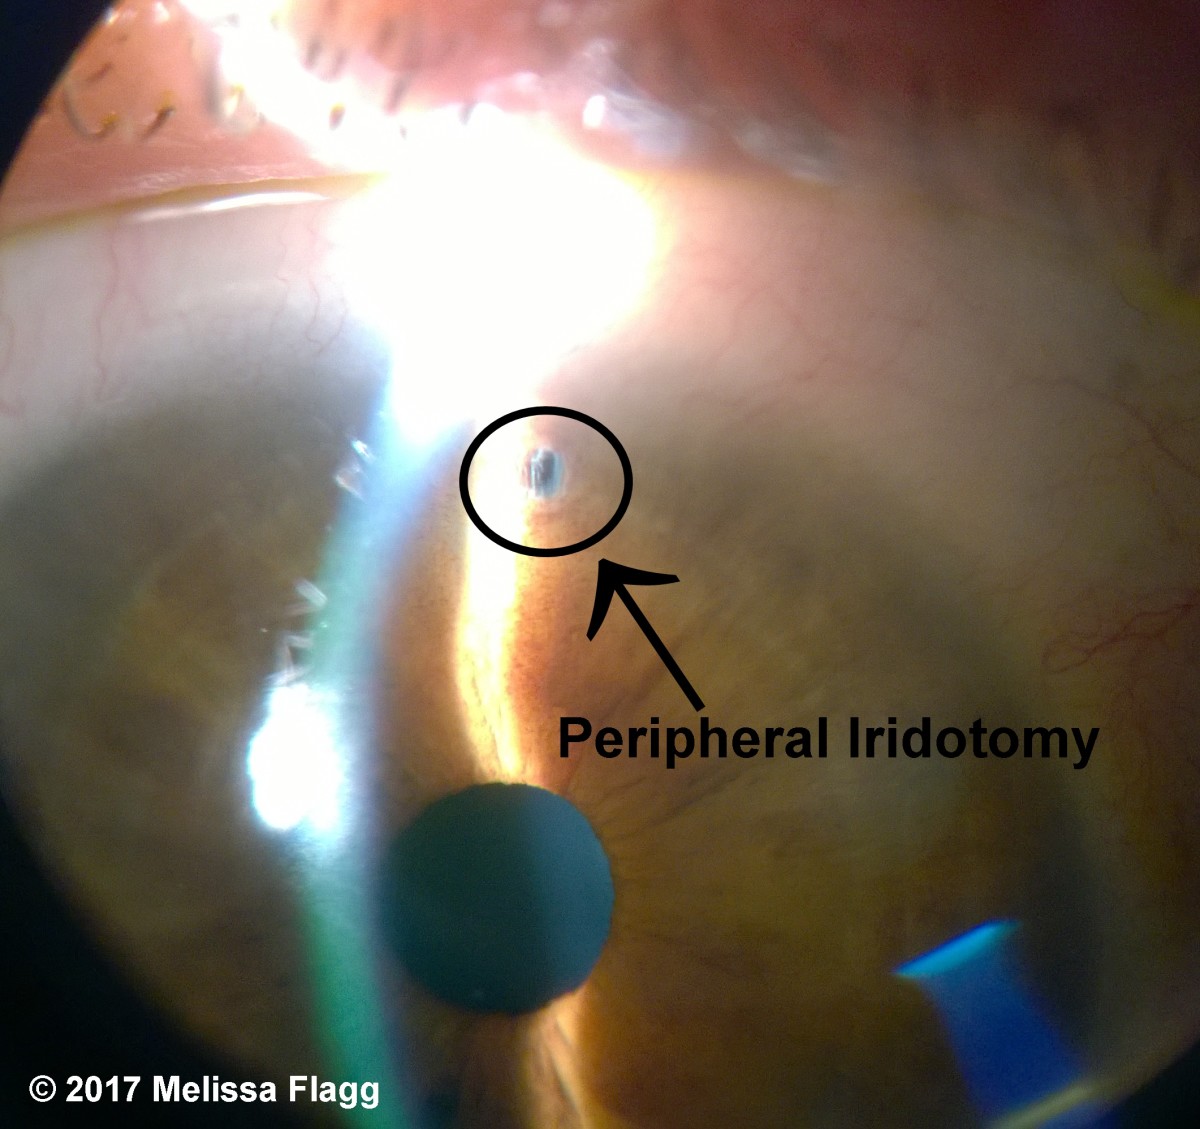 An image of a completed peripheral iridotomy.